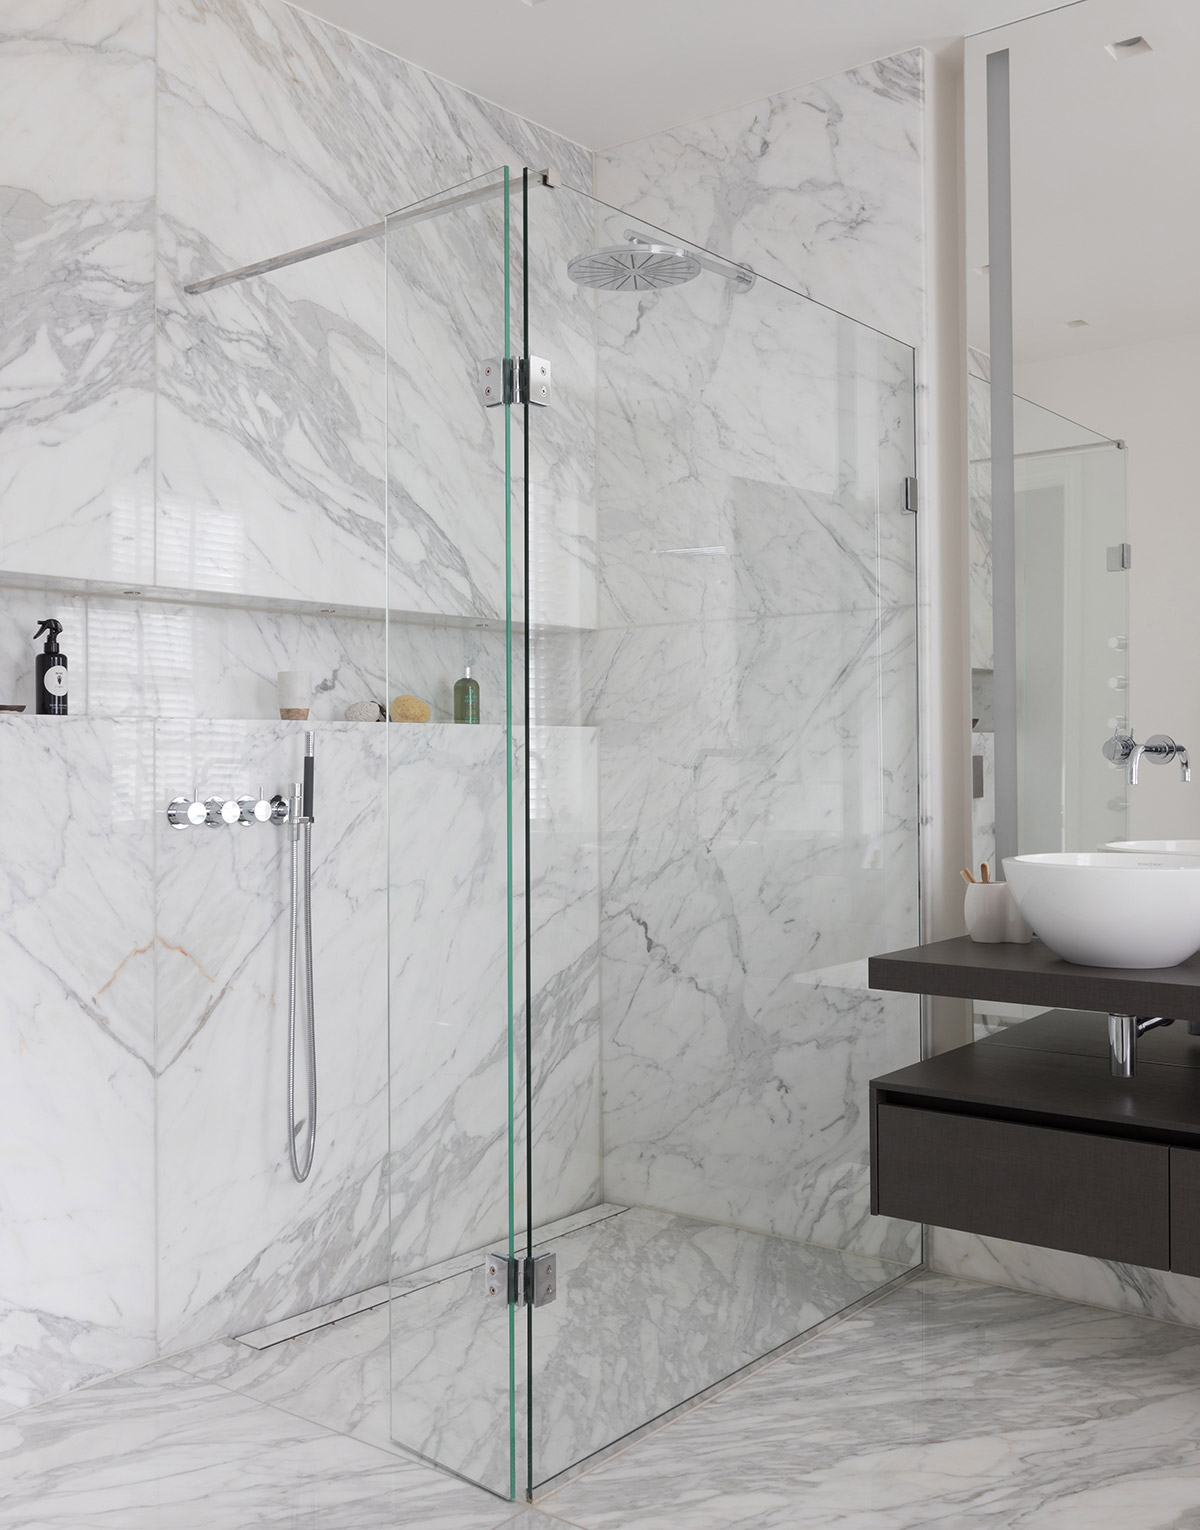 White marble carrara cladded bathroom with walk-in shower